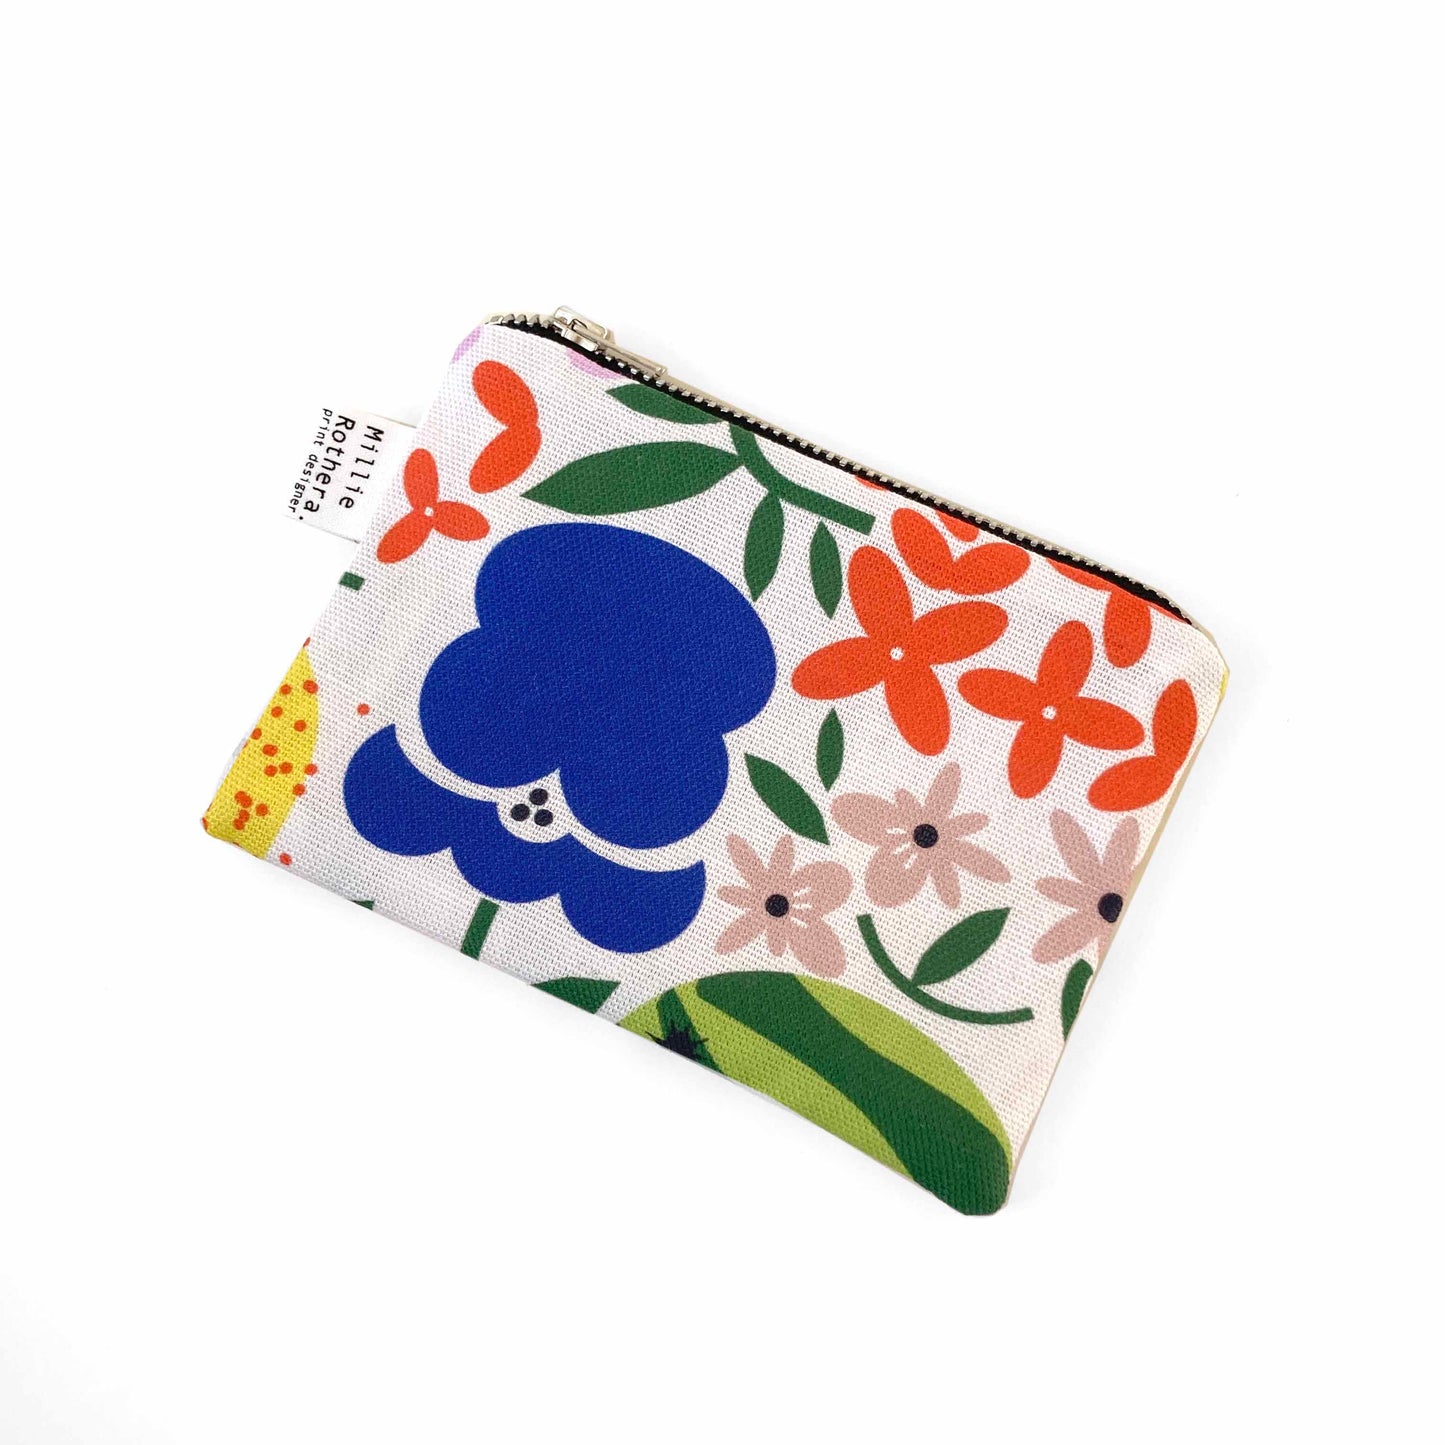 Fruits & Floral Coin Purse by Millie Rothera